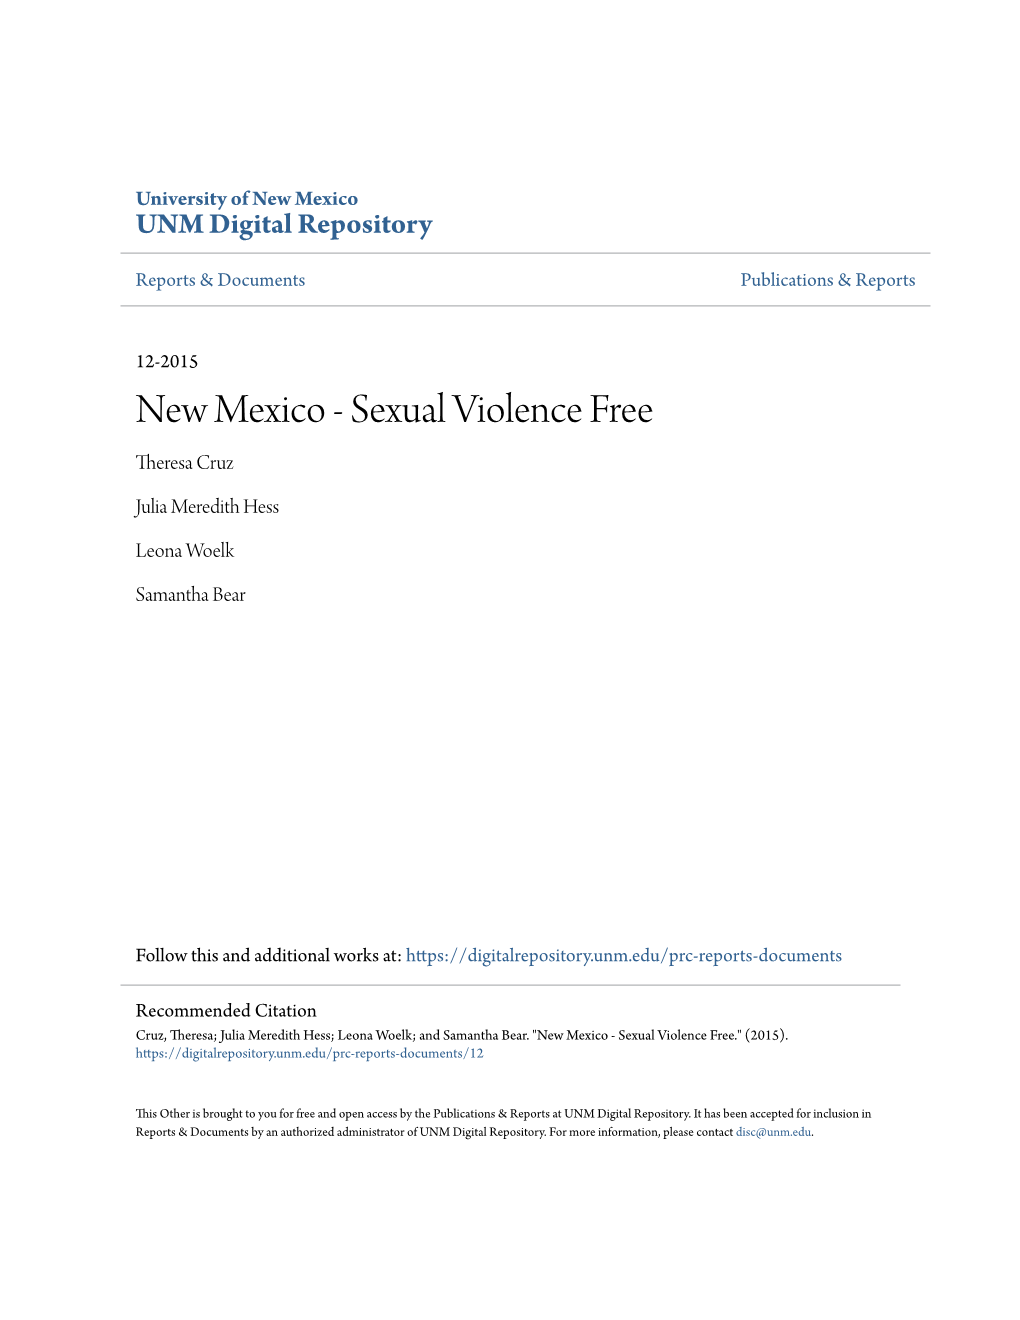 New Mexico-Sexual Violence Free